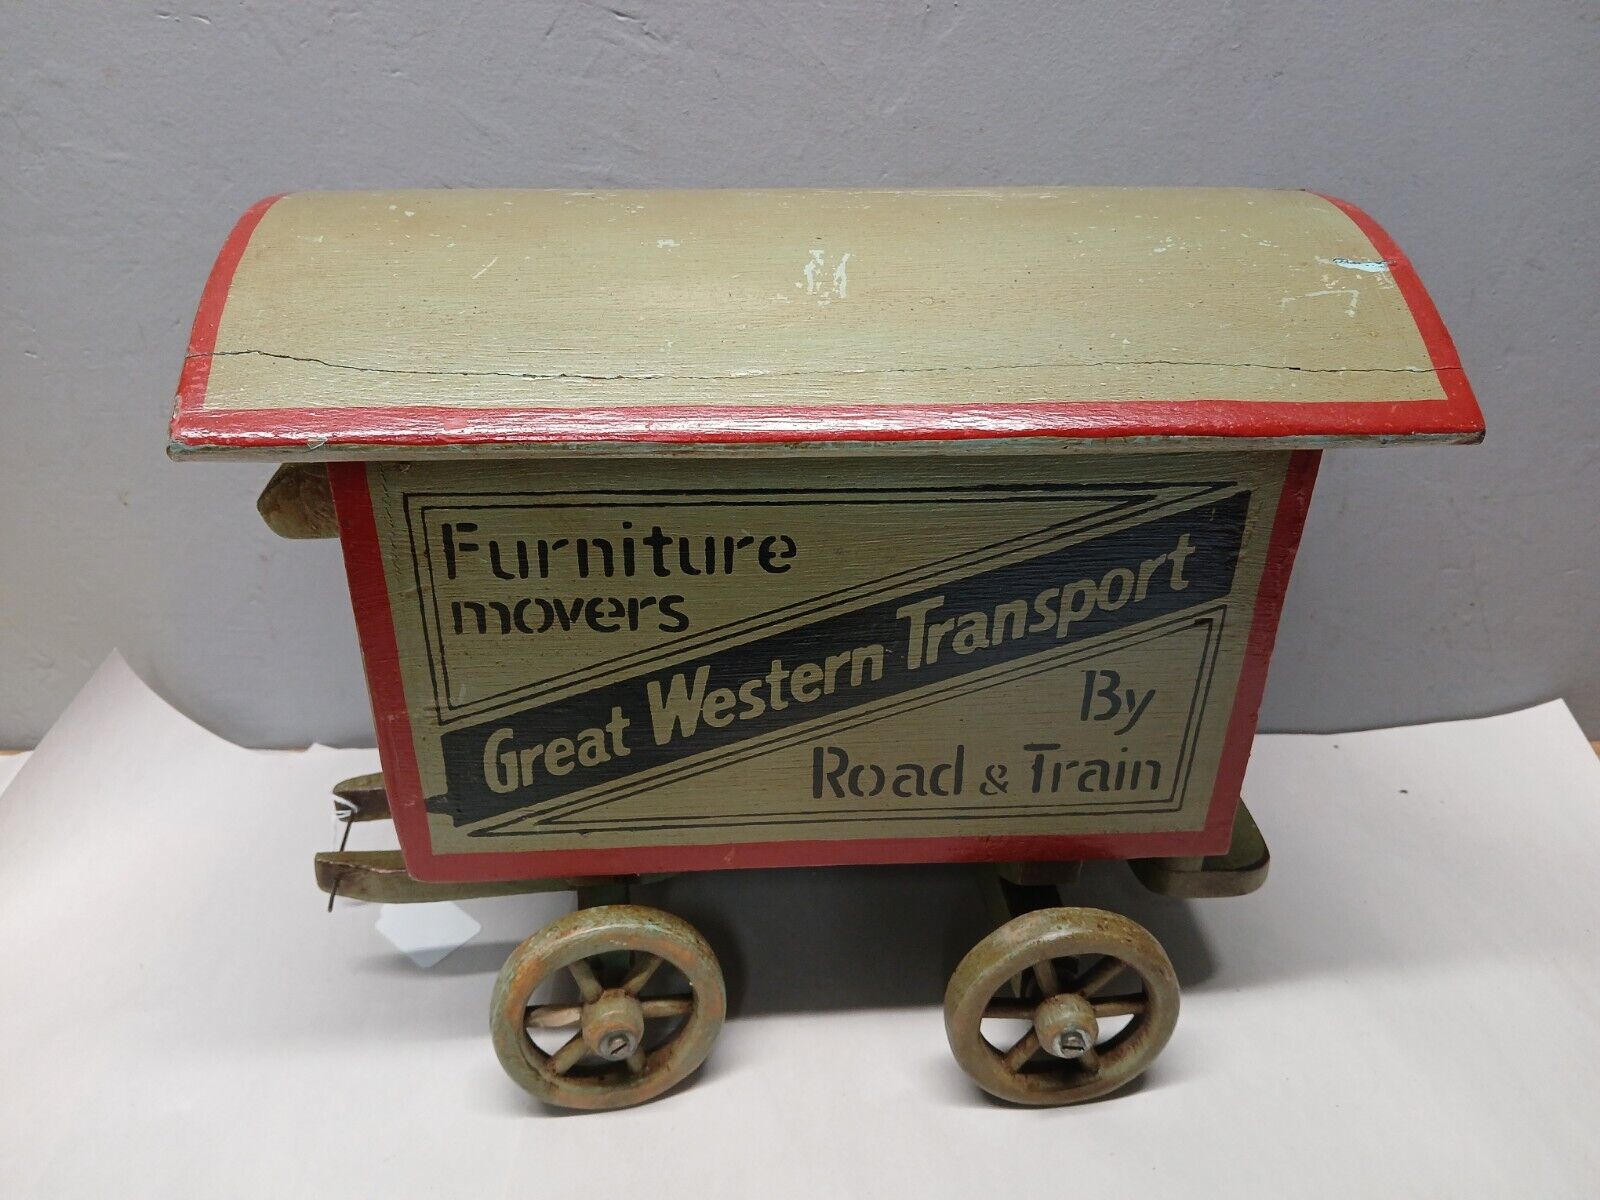 Vintage Great Western Transport Furniture Movers Store Display Wagon